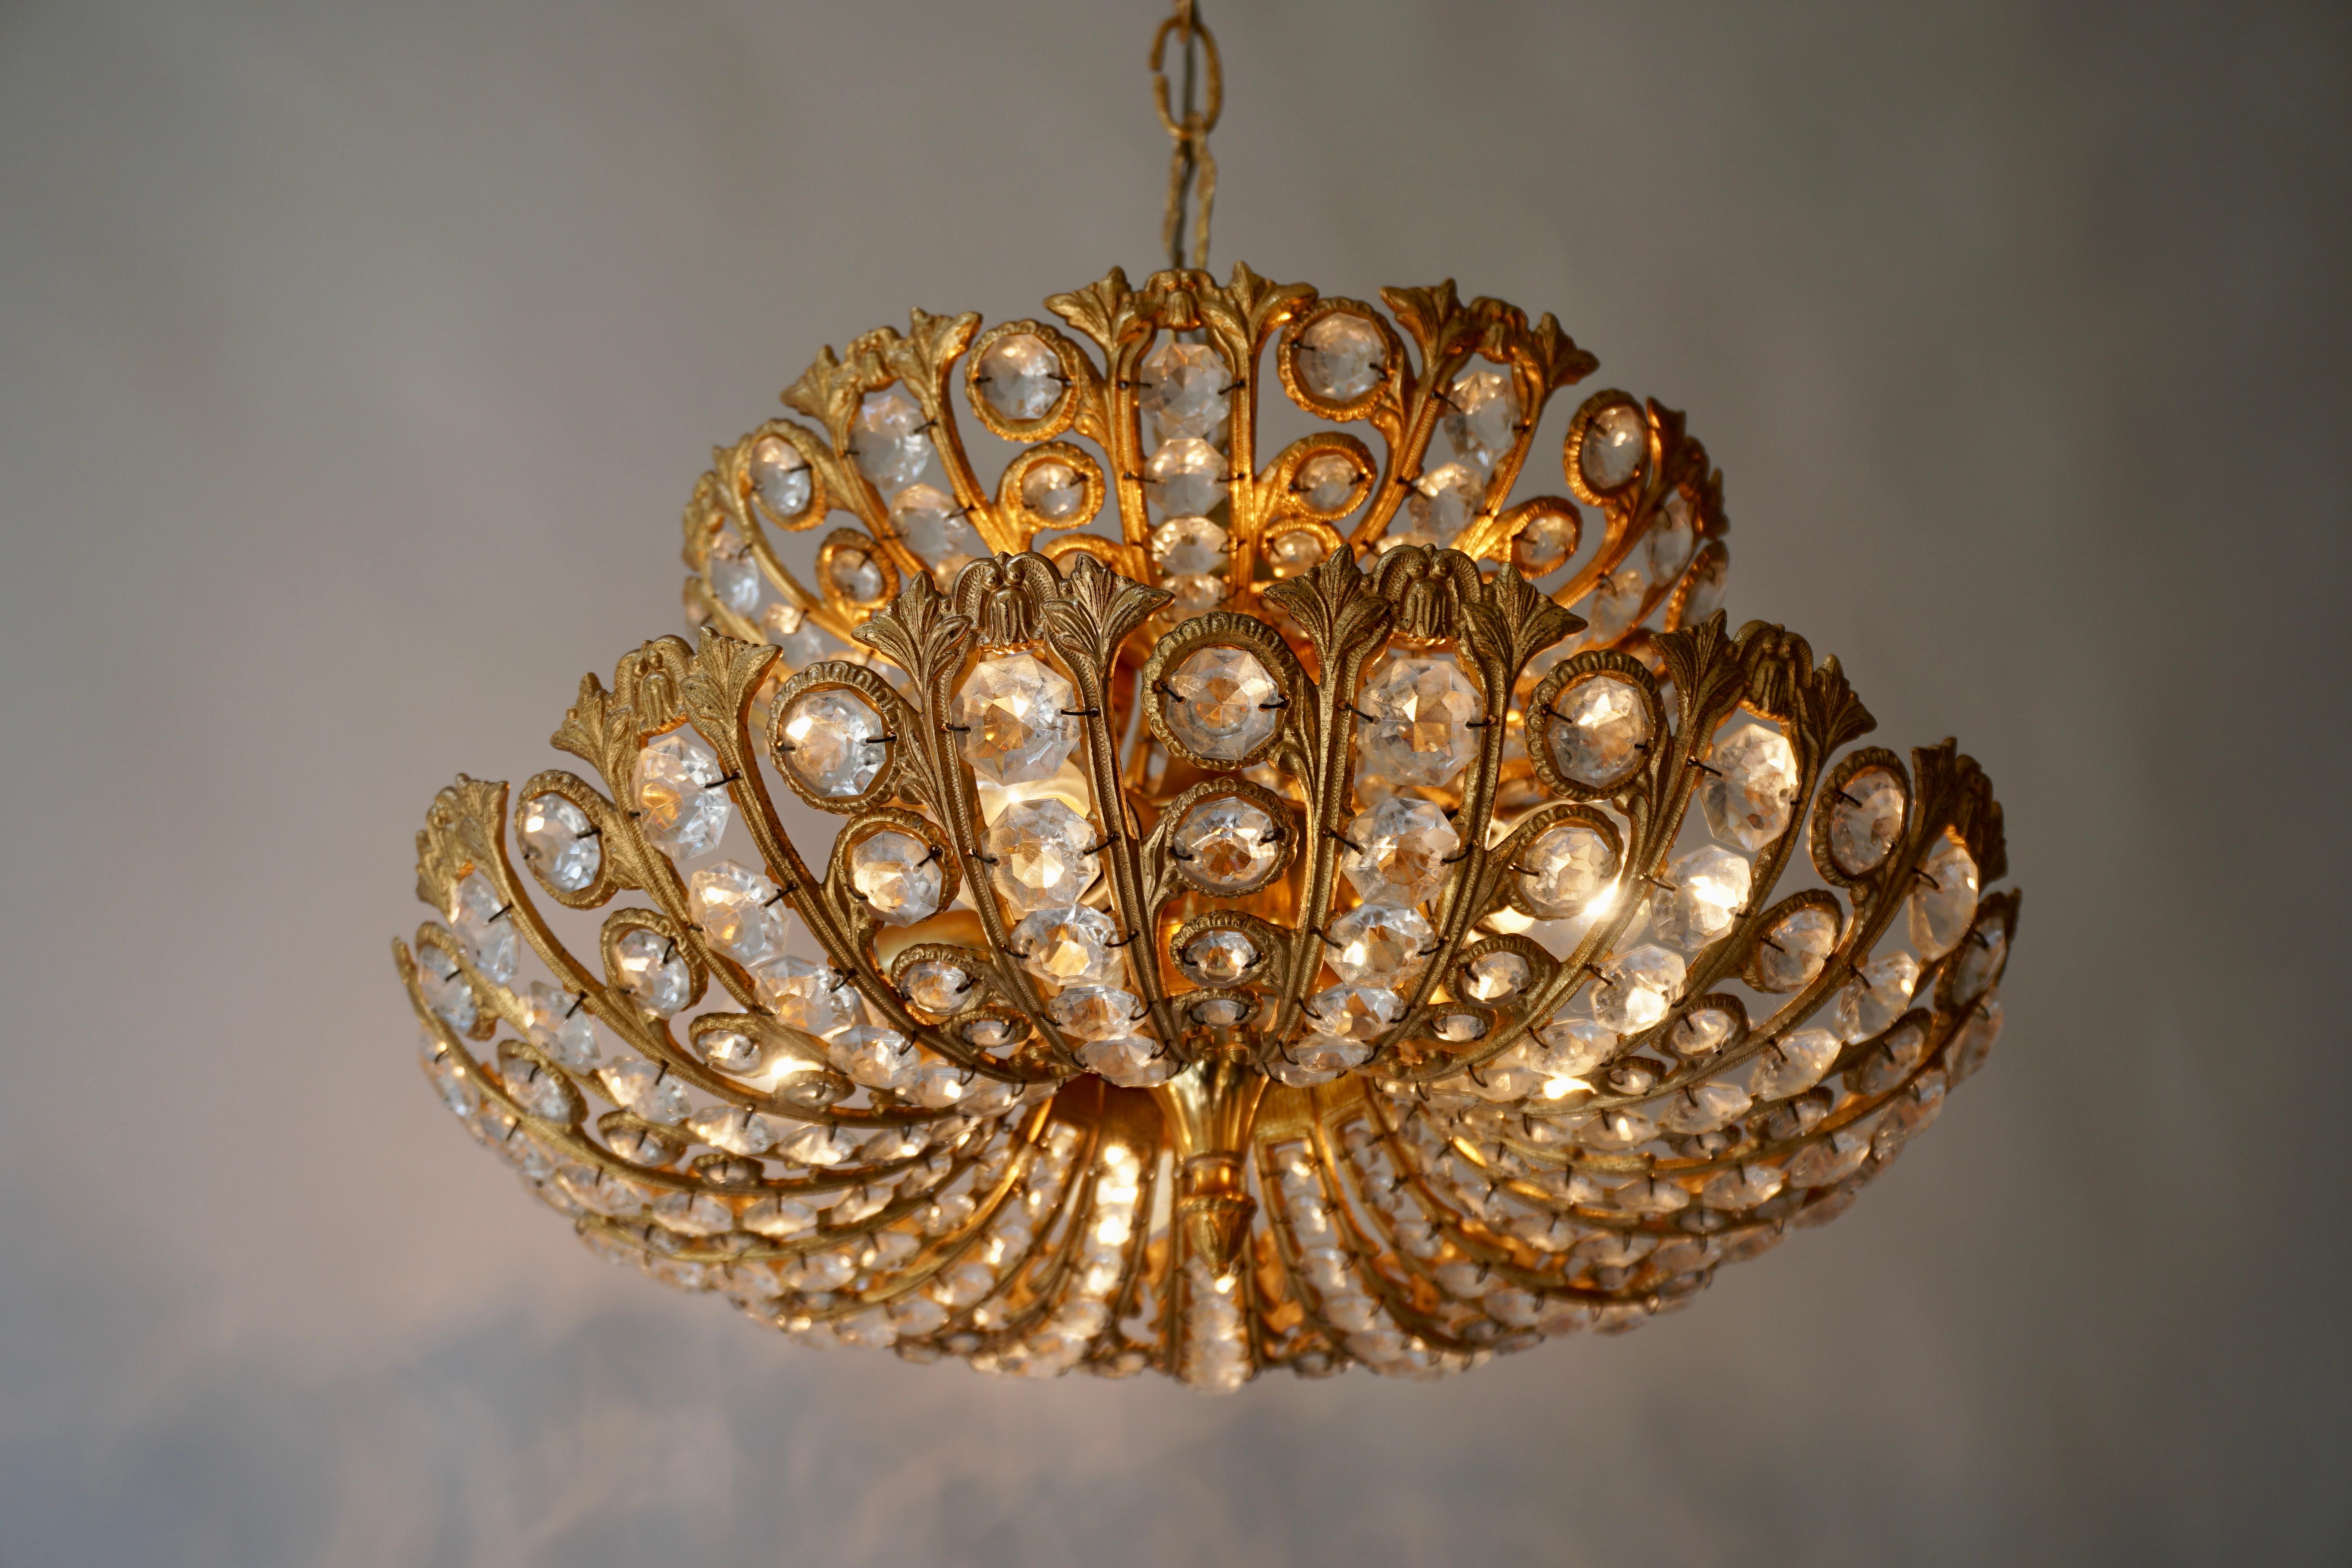 Spanish Brass and Crystal Chandelier by Ernest Palm for Palwa, 1970s For Sale 1